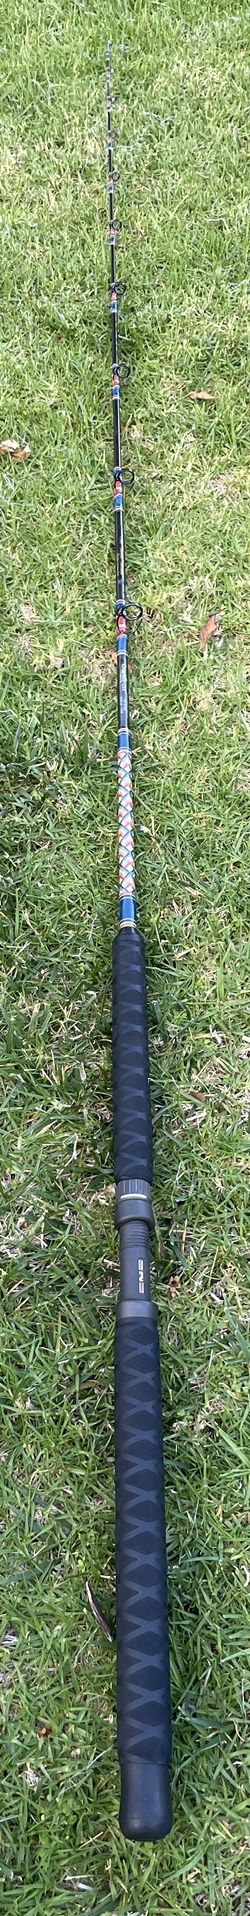 Graphite USA 8' Fishing Rod for Sale in Oceanside, CA - OfferUp